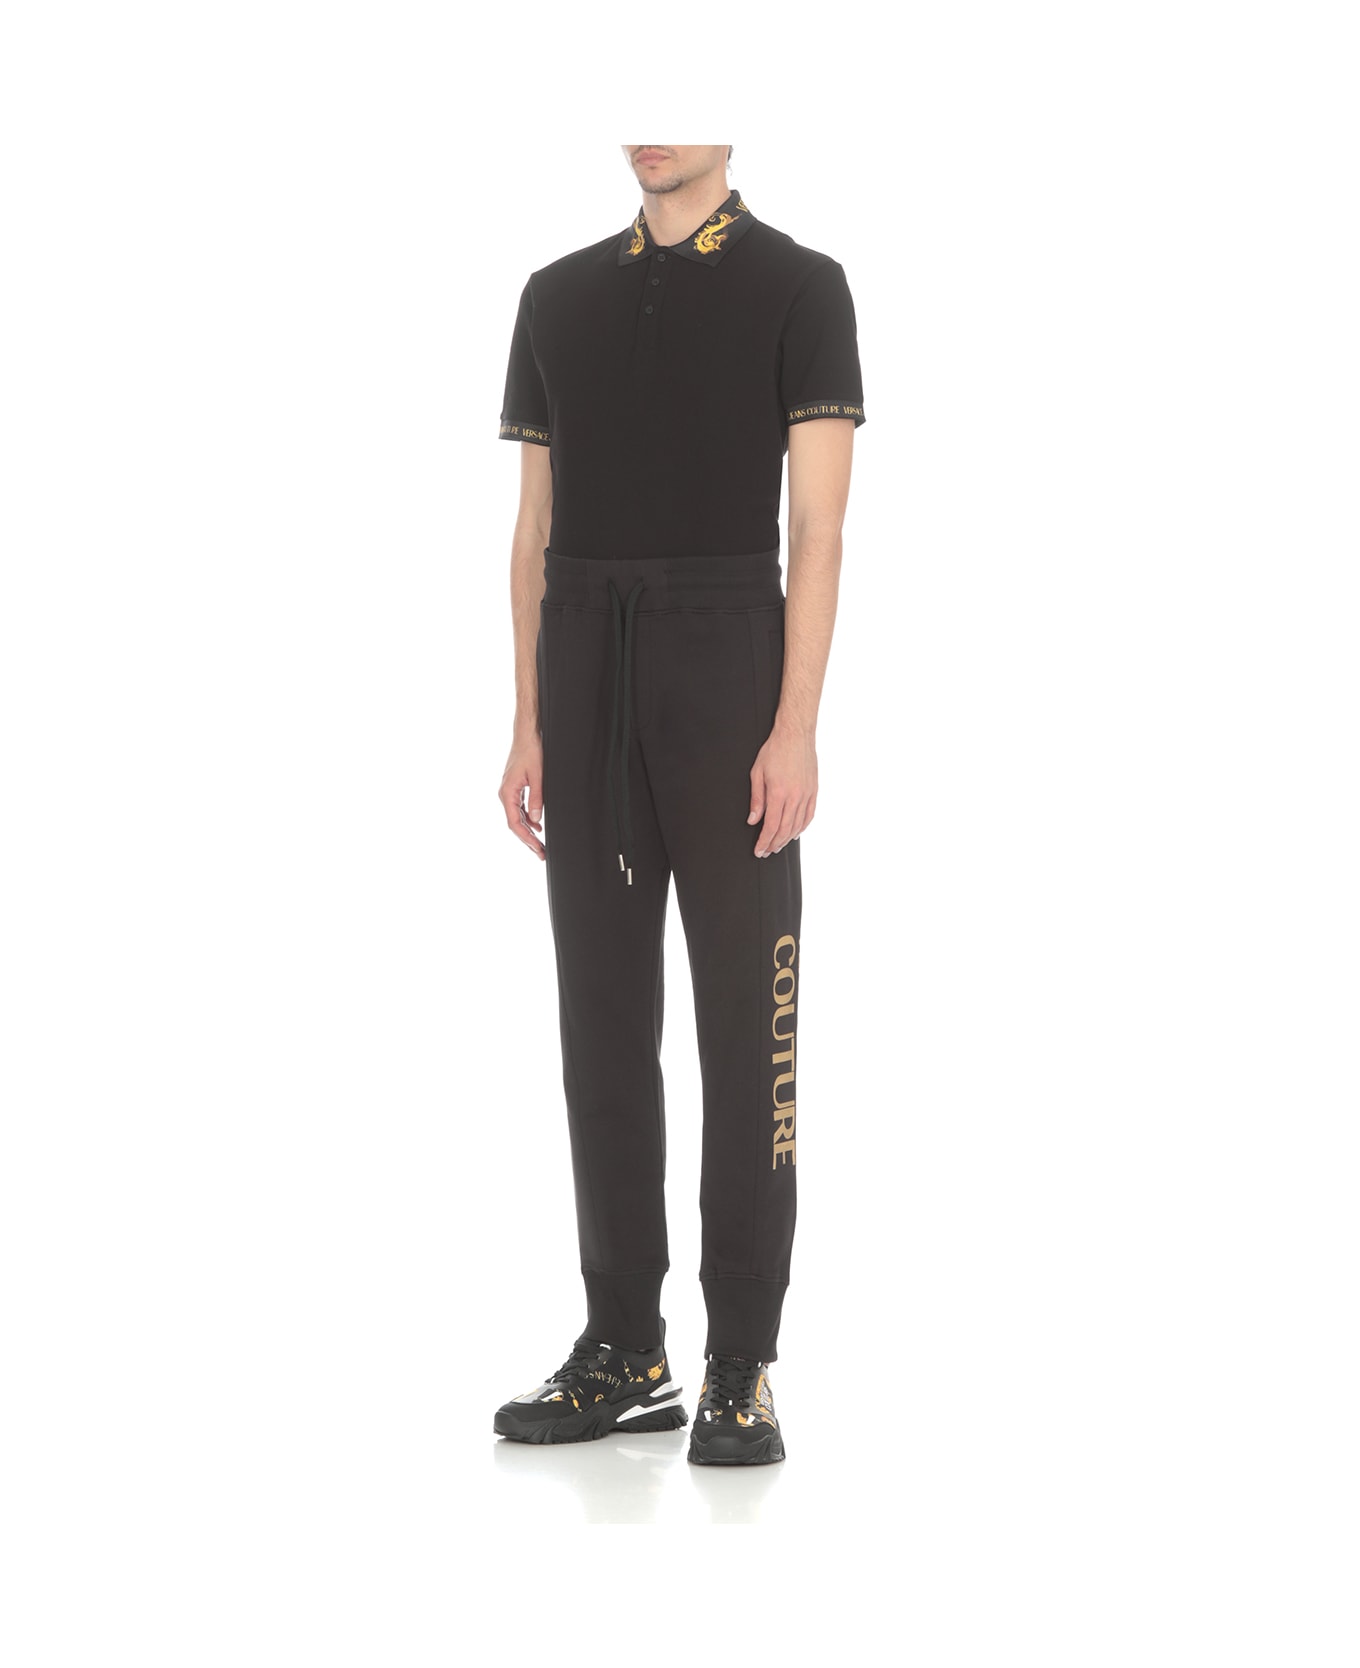 Versace Jeans Couture Logo Printed Drawstring Track Pants - Black